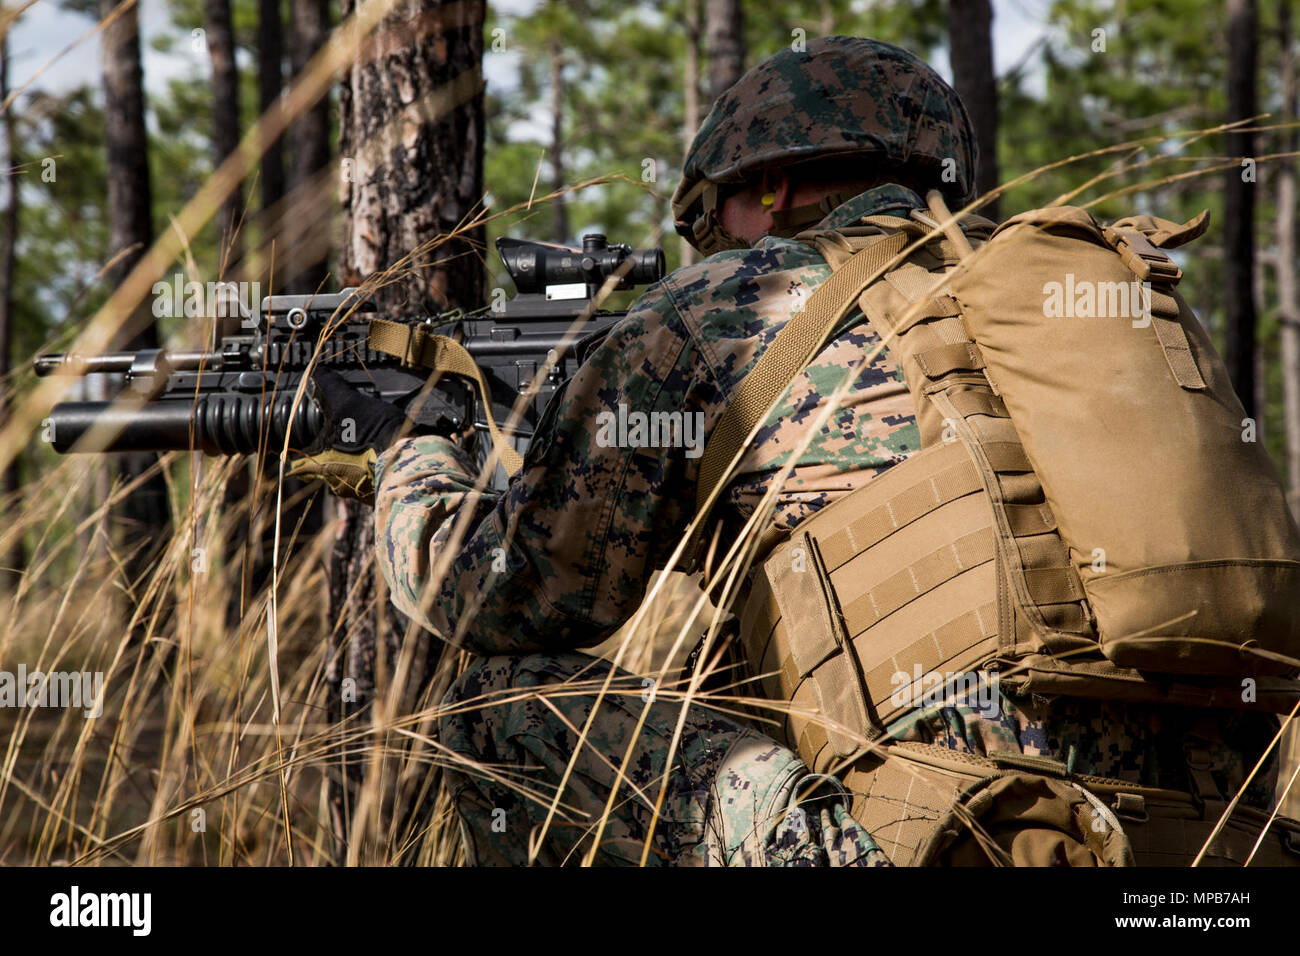 A U.S. Marine attached to Advanced Infantry Training Battalion, School of Infantry-East (SOI-E), looks down the sights of his M4A1 carbine during a combined arms exercise at Camp Lejeune, N.C., April 7, 2017. The mission of SOI-E is to train entry-level and advanced level Marines in the skills required of an Infantry Marine for the operating forces. Stock Photo